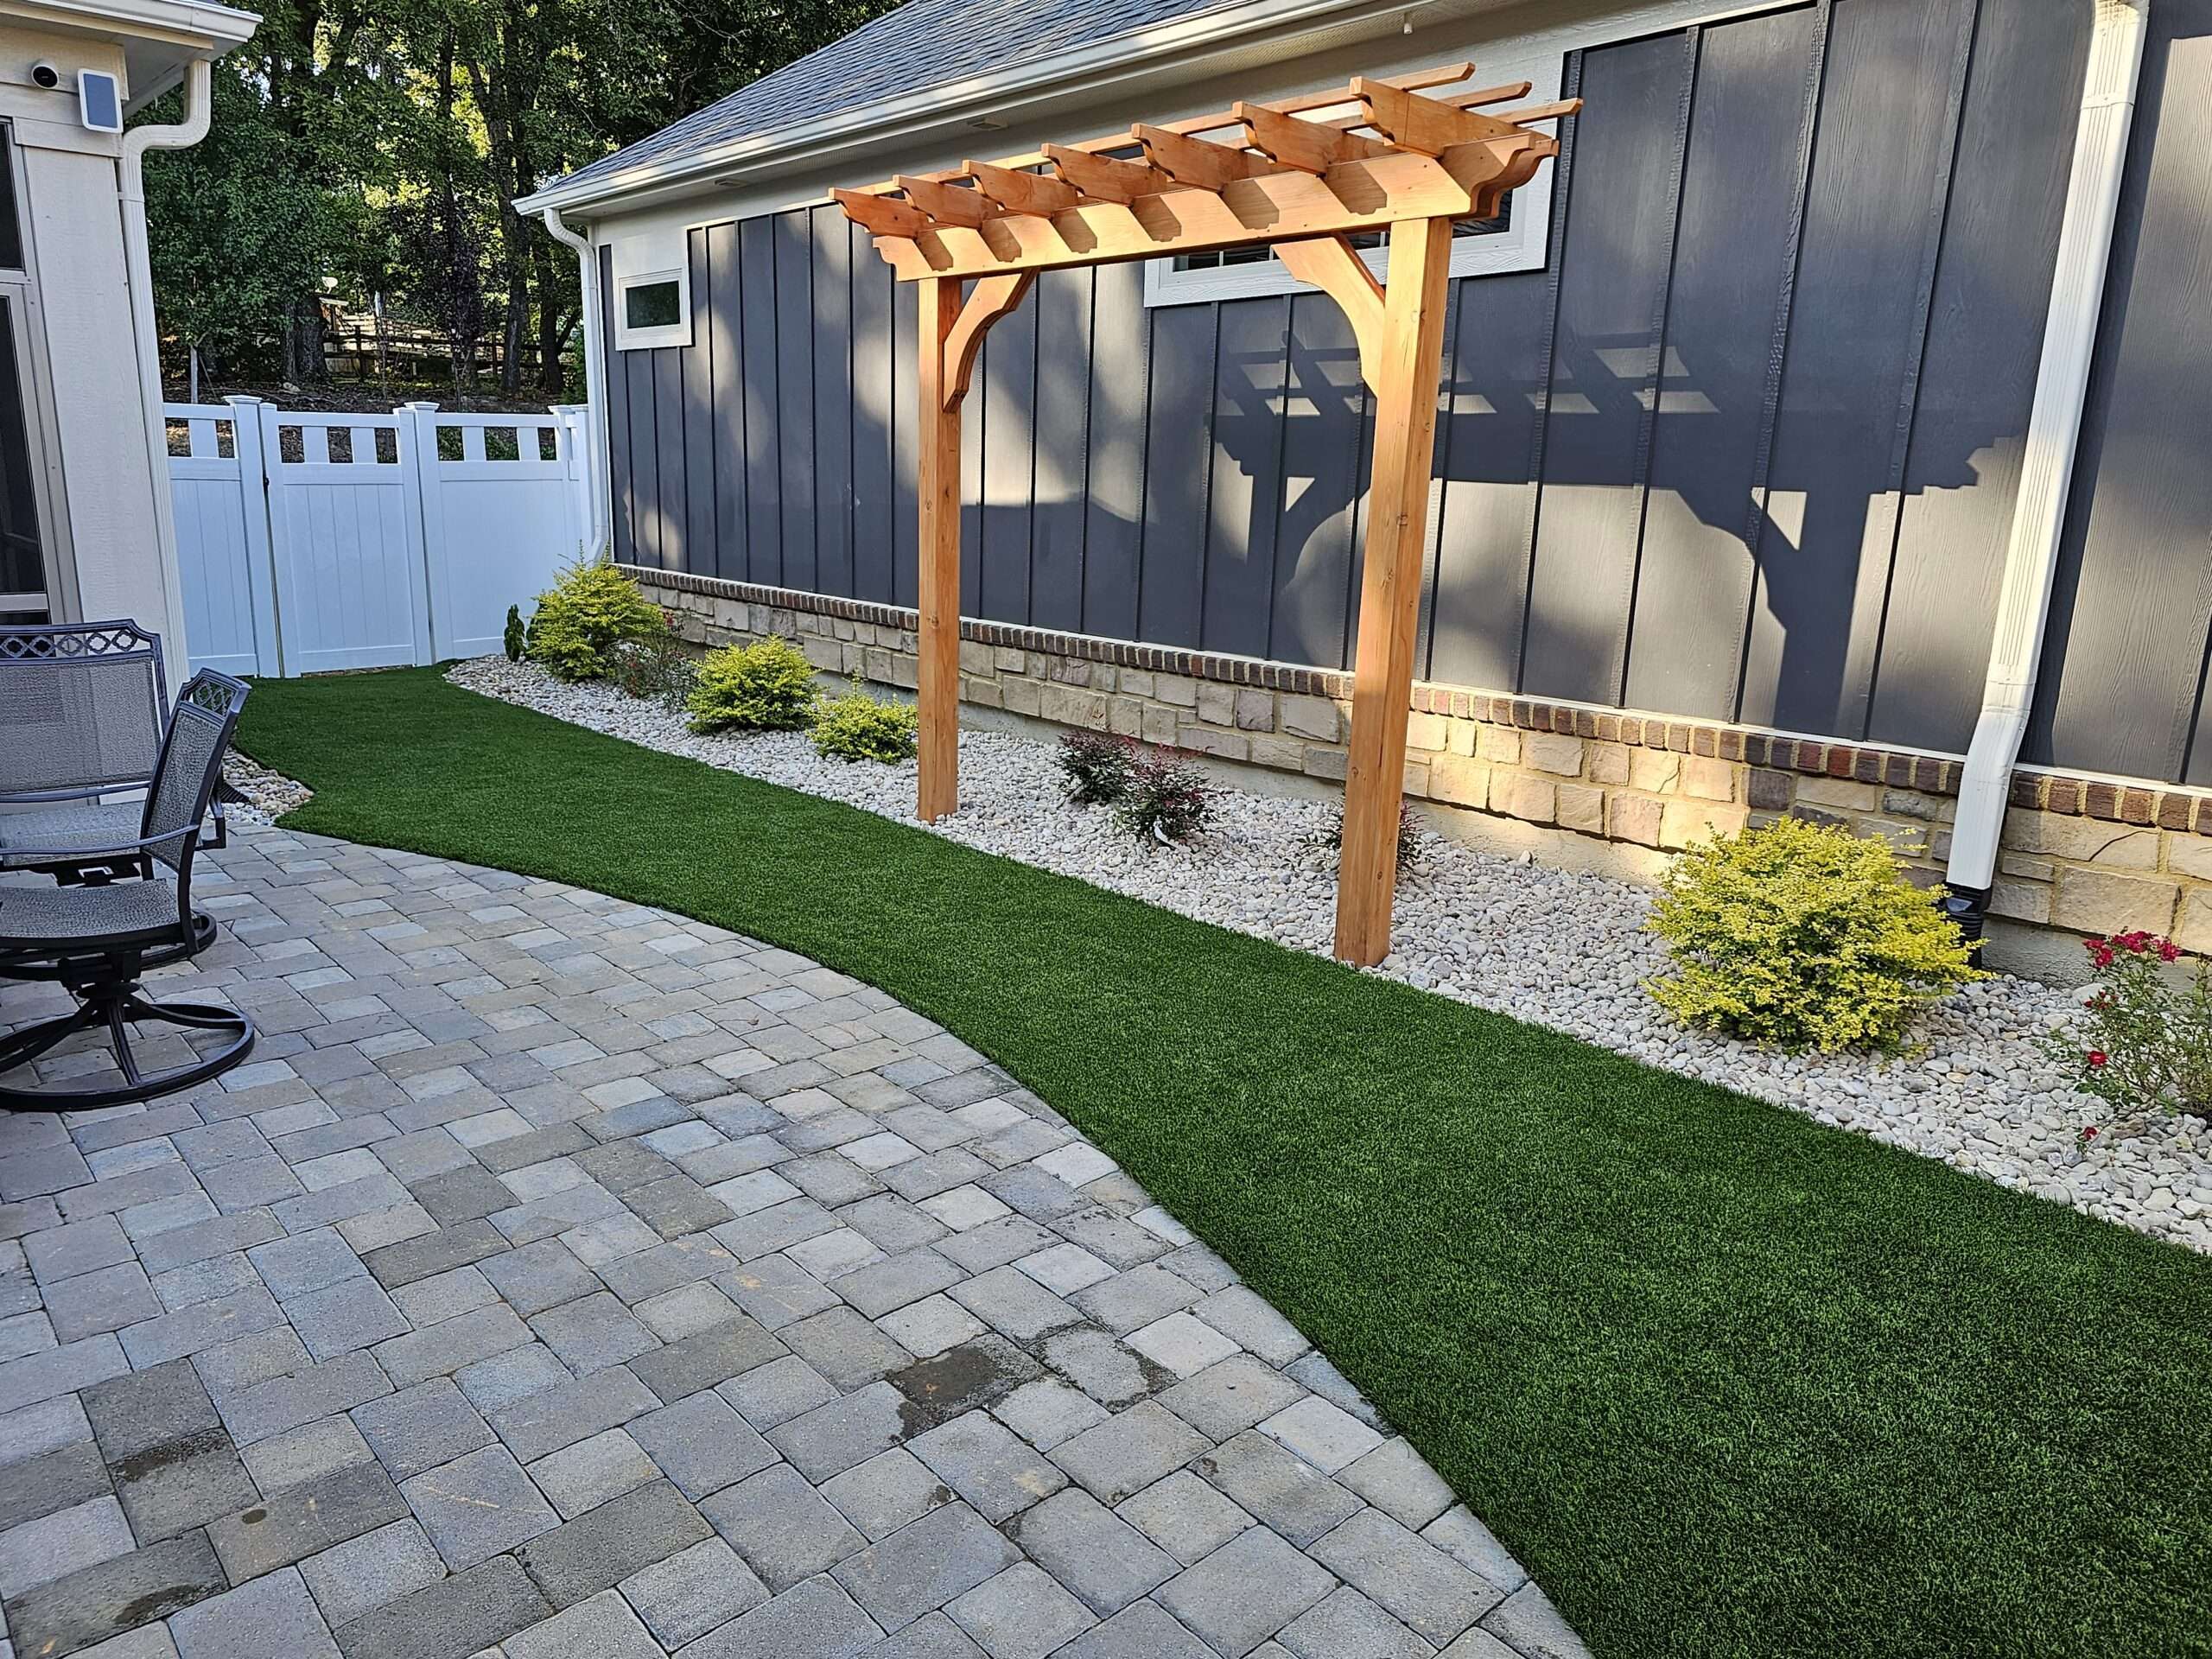 Neatly designed backyard with a paver patio leading to a pergola, bordered by vibrant artificial turf and landscaping rocks with flowering shrubs alongside a grey house with white trim.